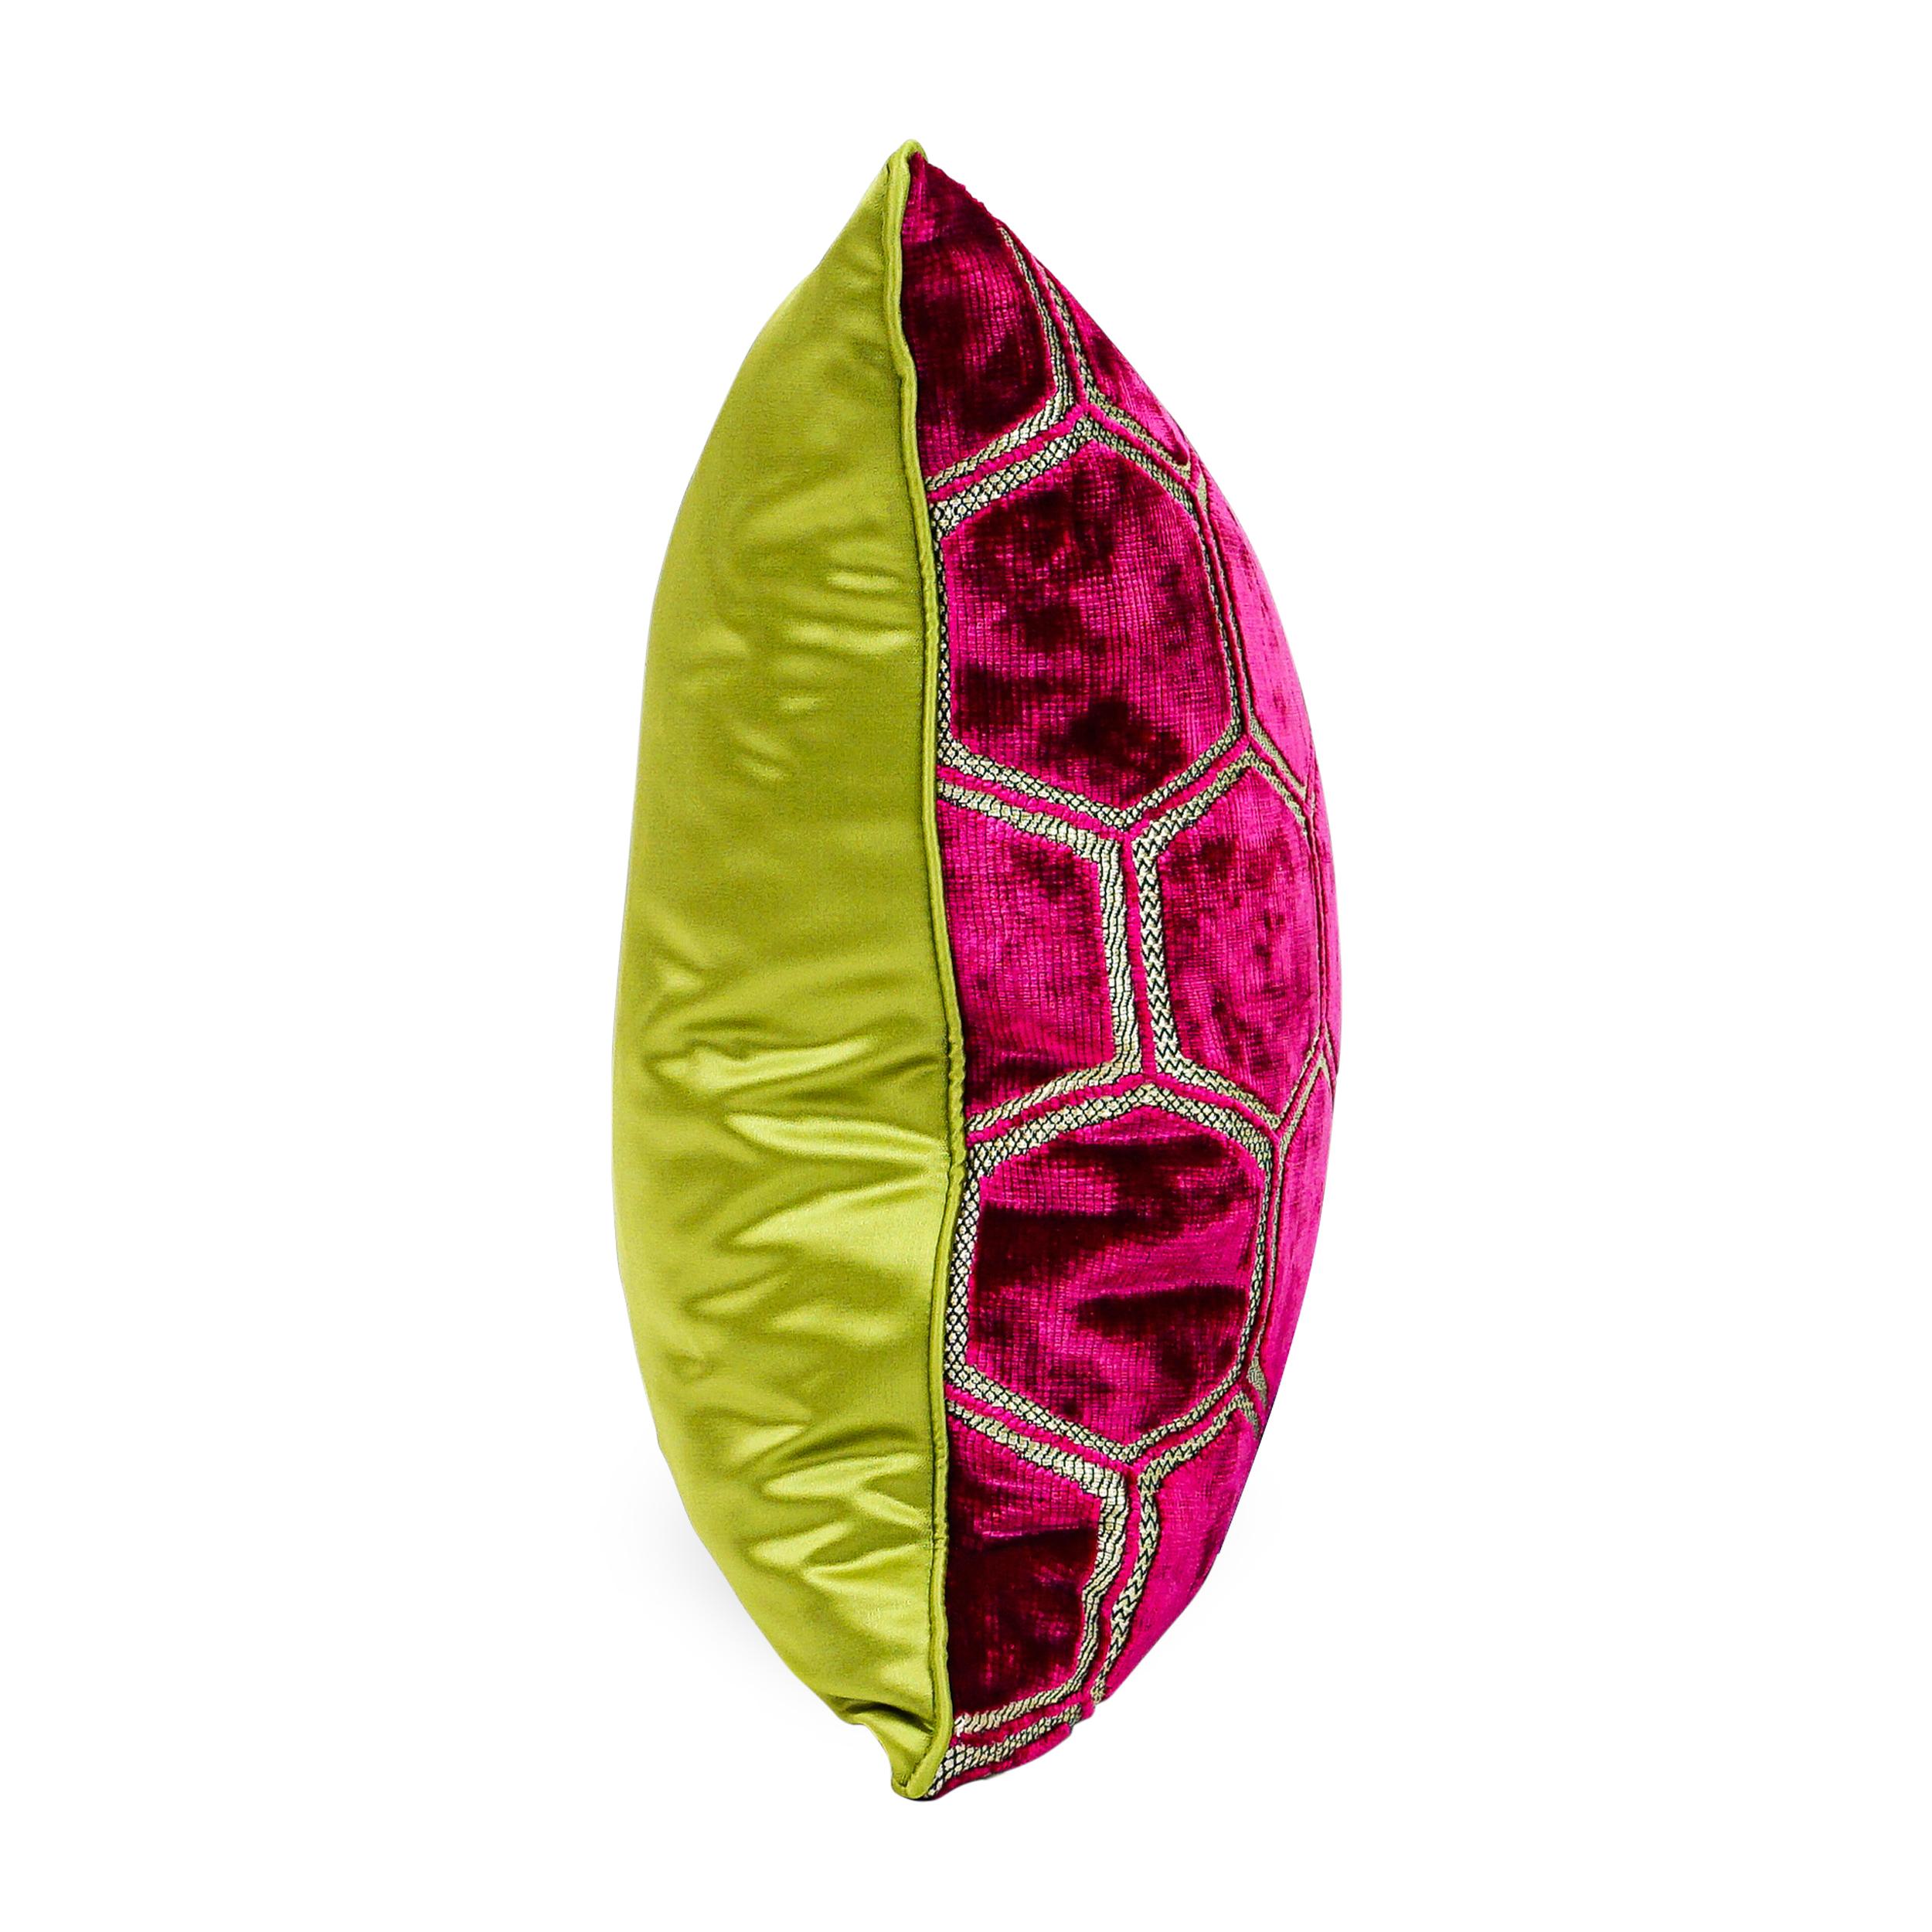 Fuchsia Hexagonal Cut Velvet Square Pillows with Chartreuse Sateen Back For Sale 6